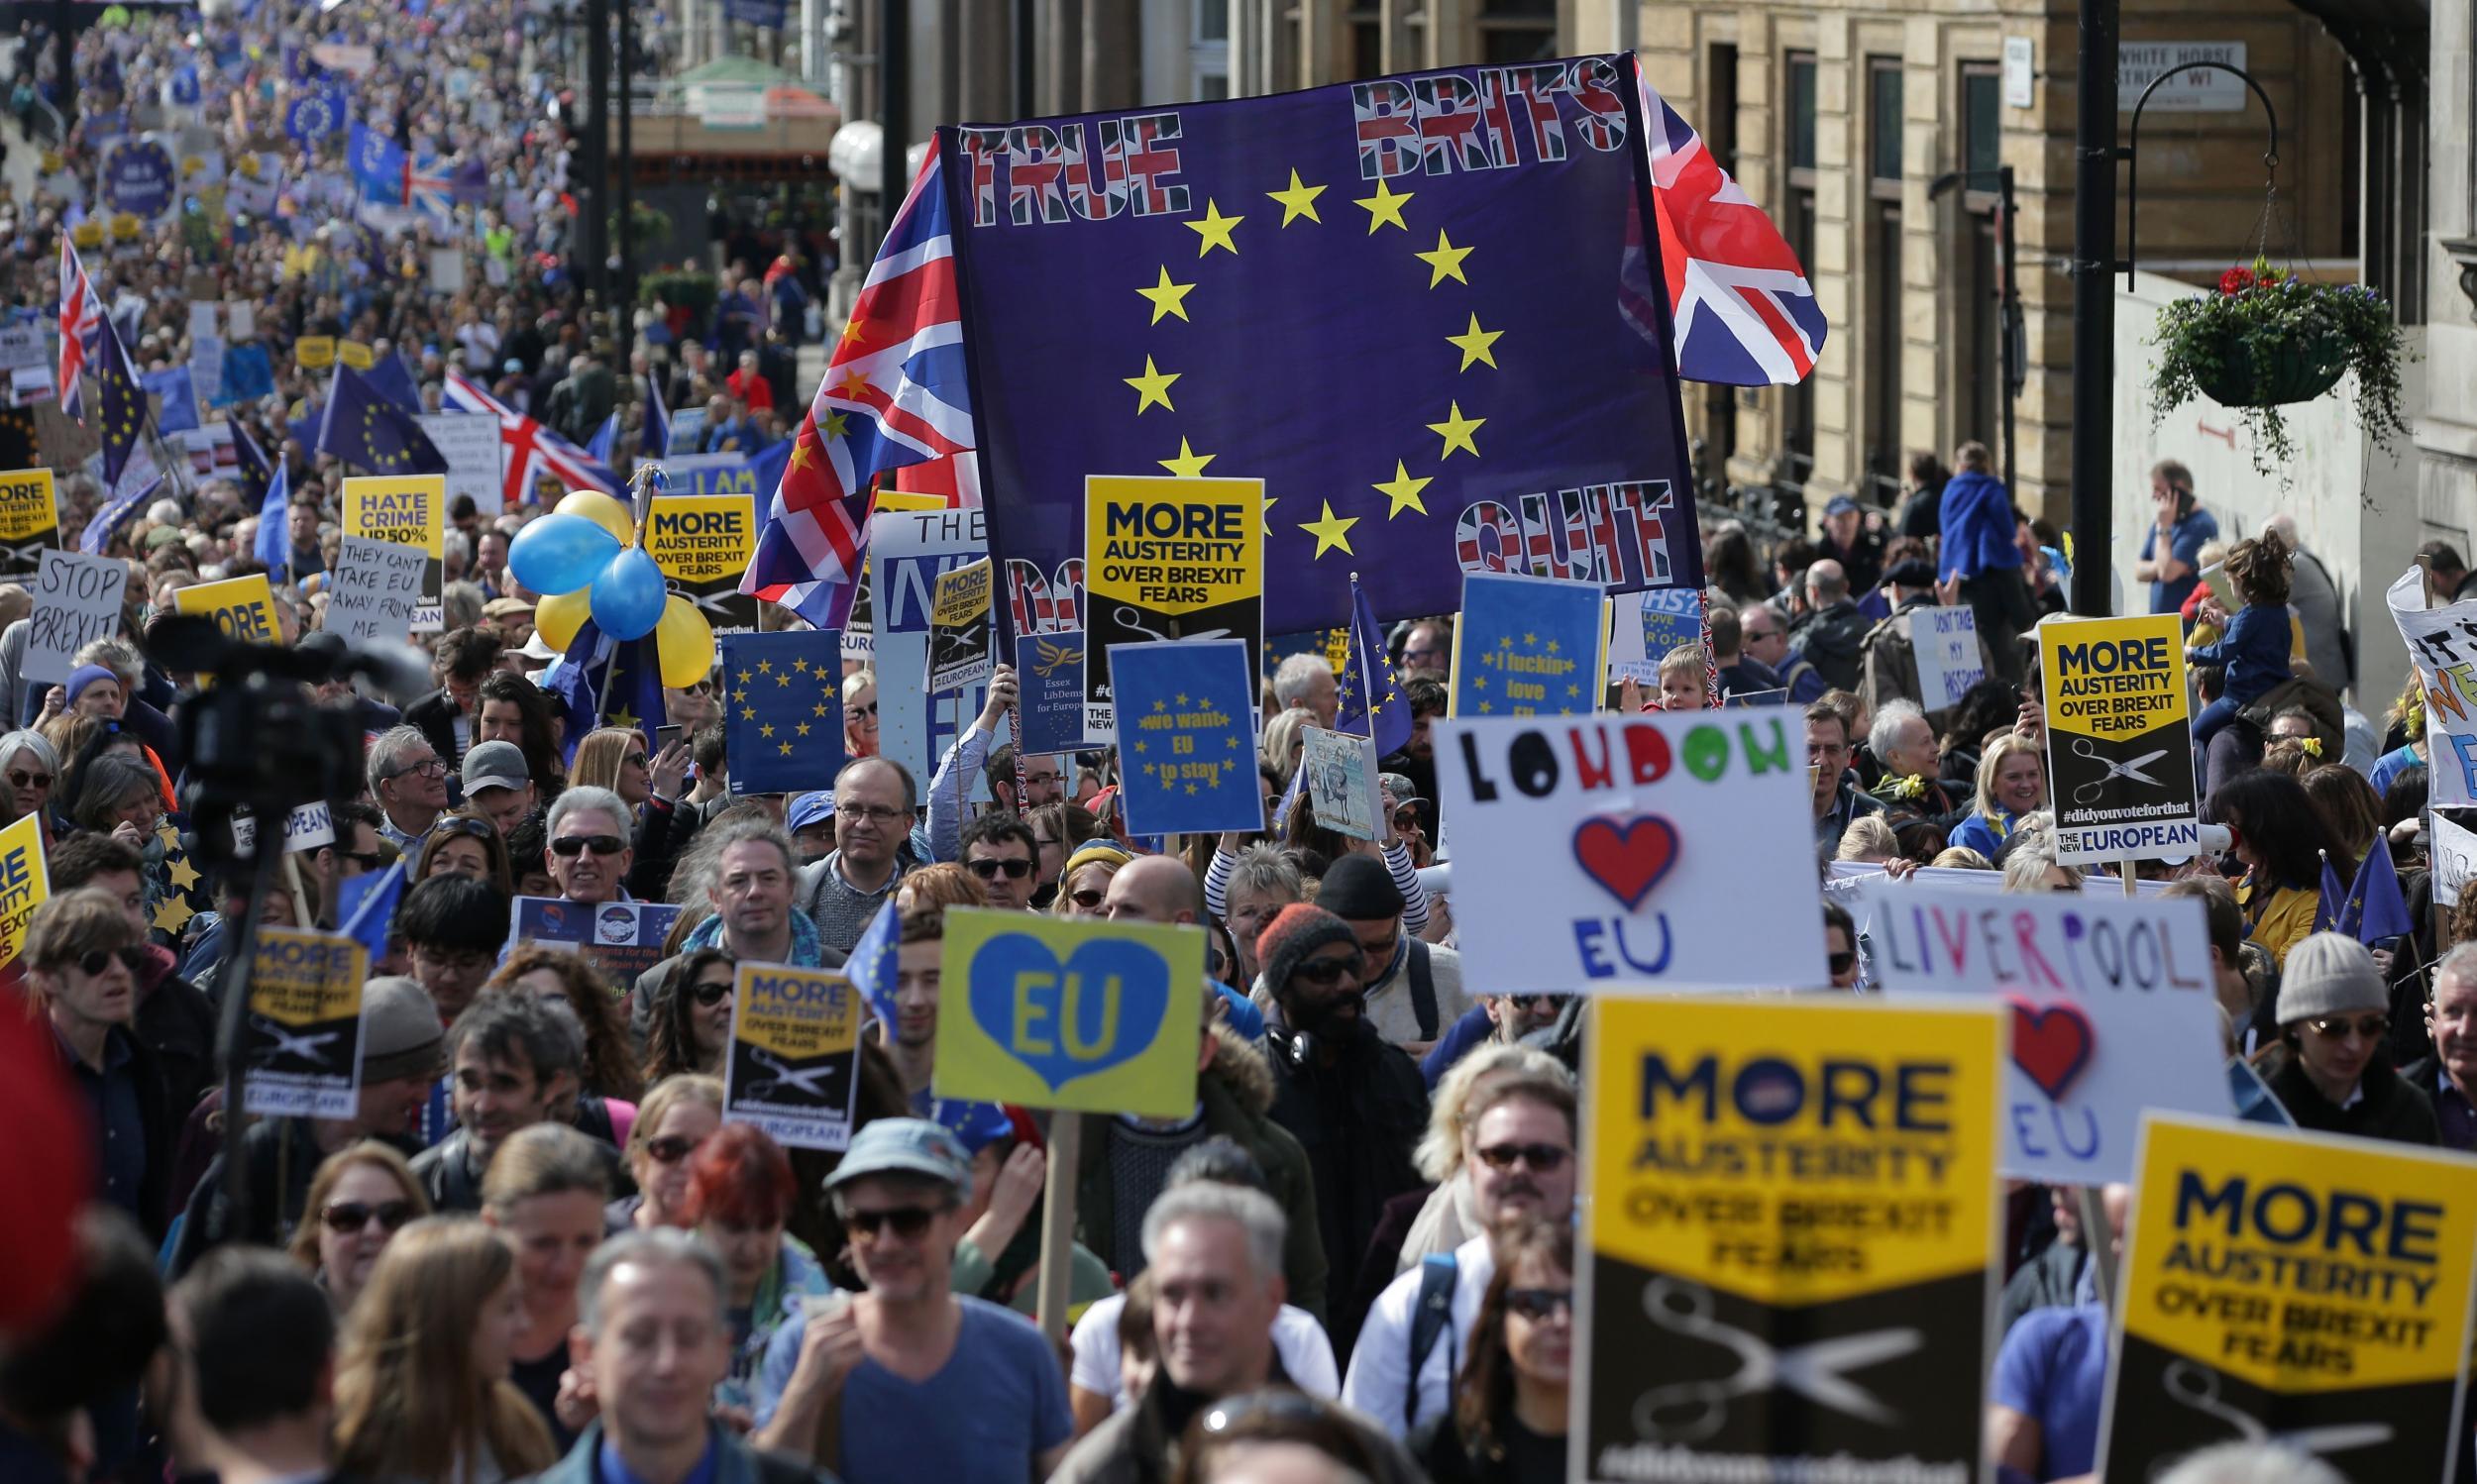 Thousands protested against Brexit in London last weekend